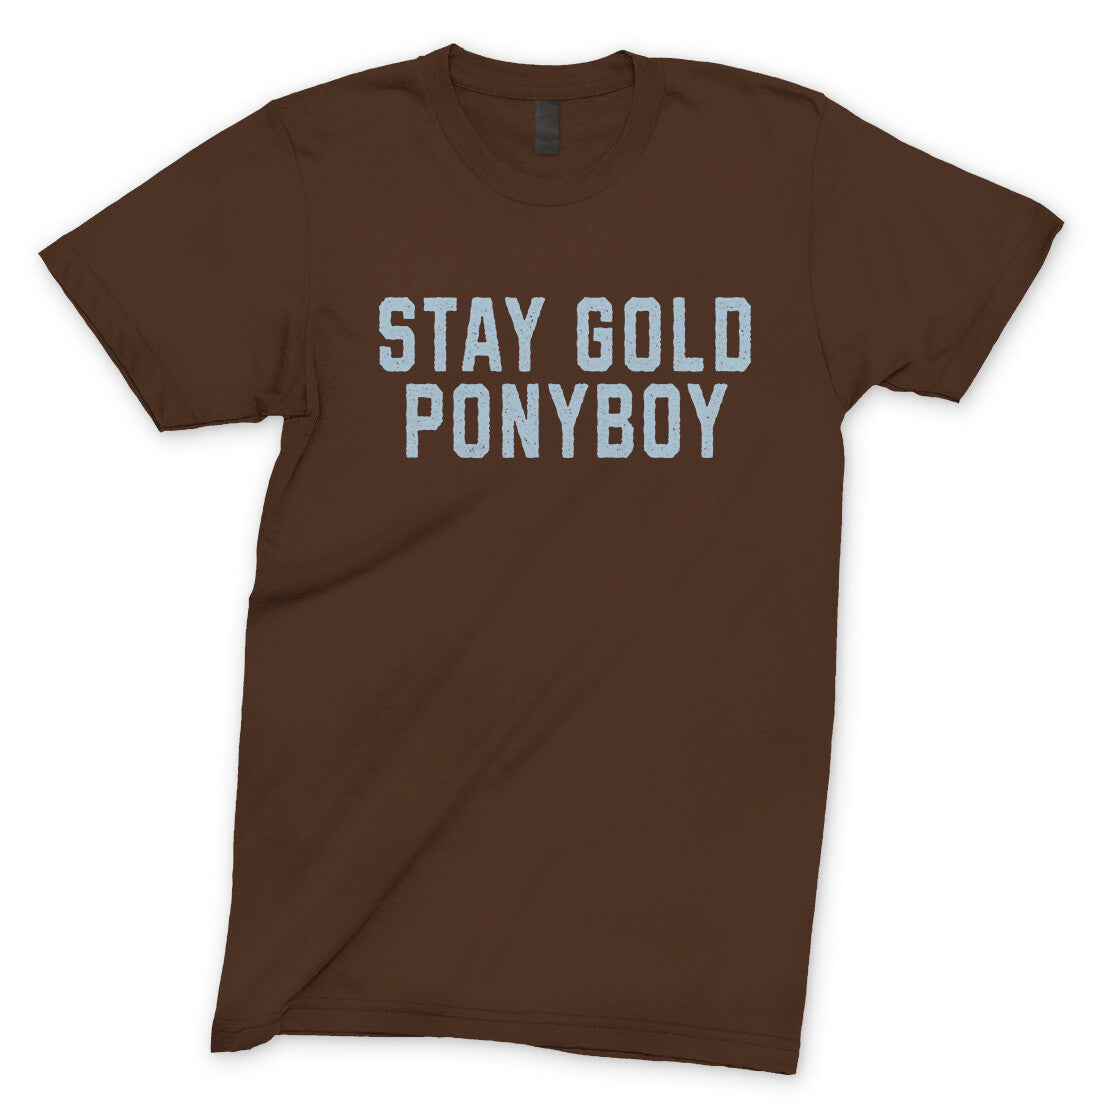 Stay Gold Ponyboy in Dark Chocolate Color